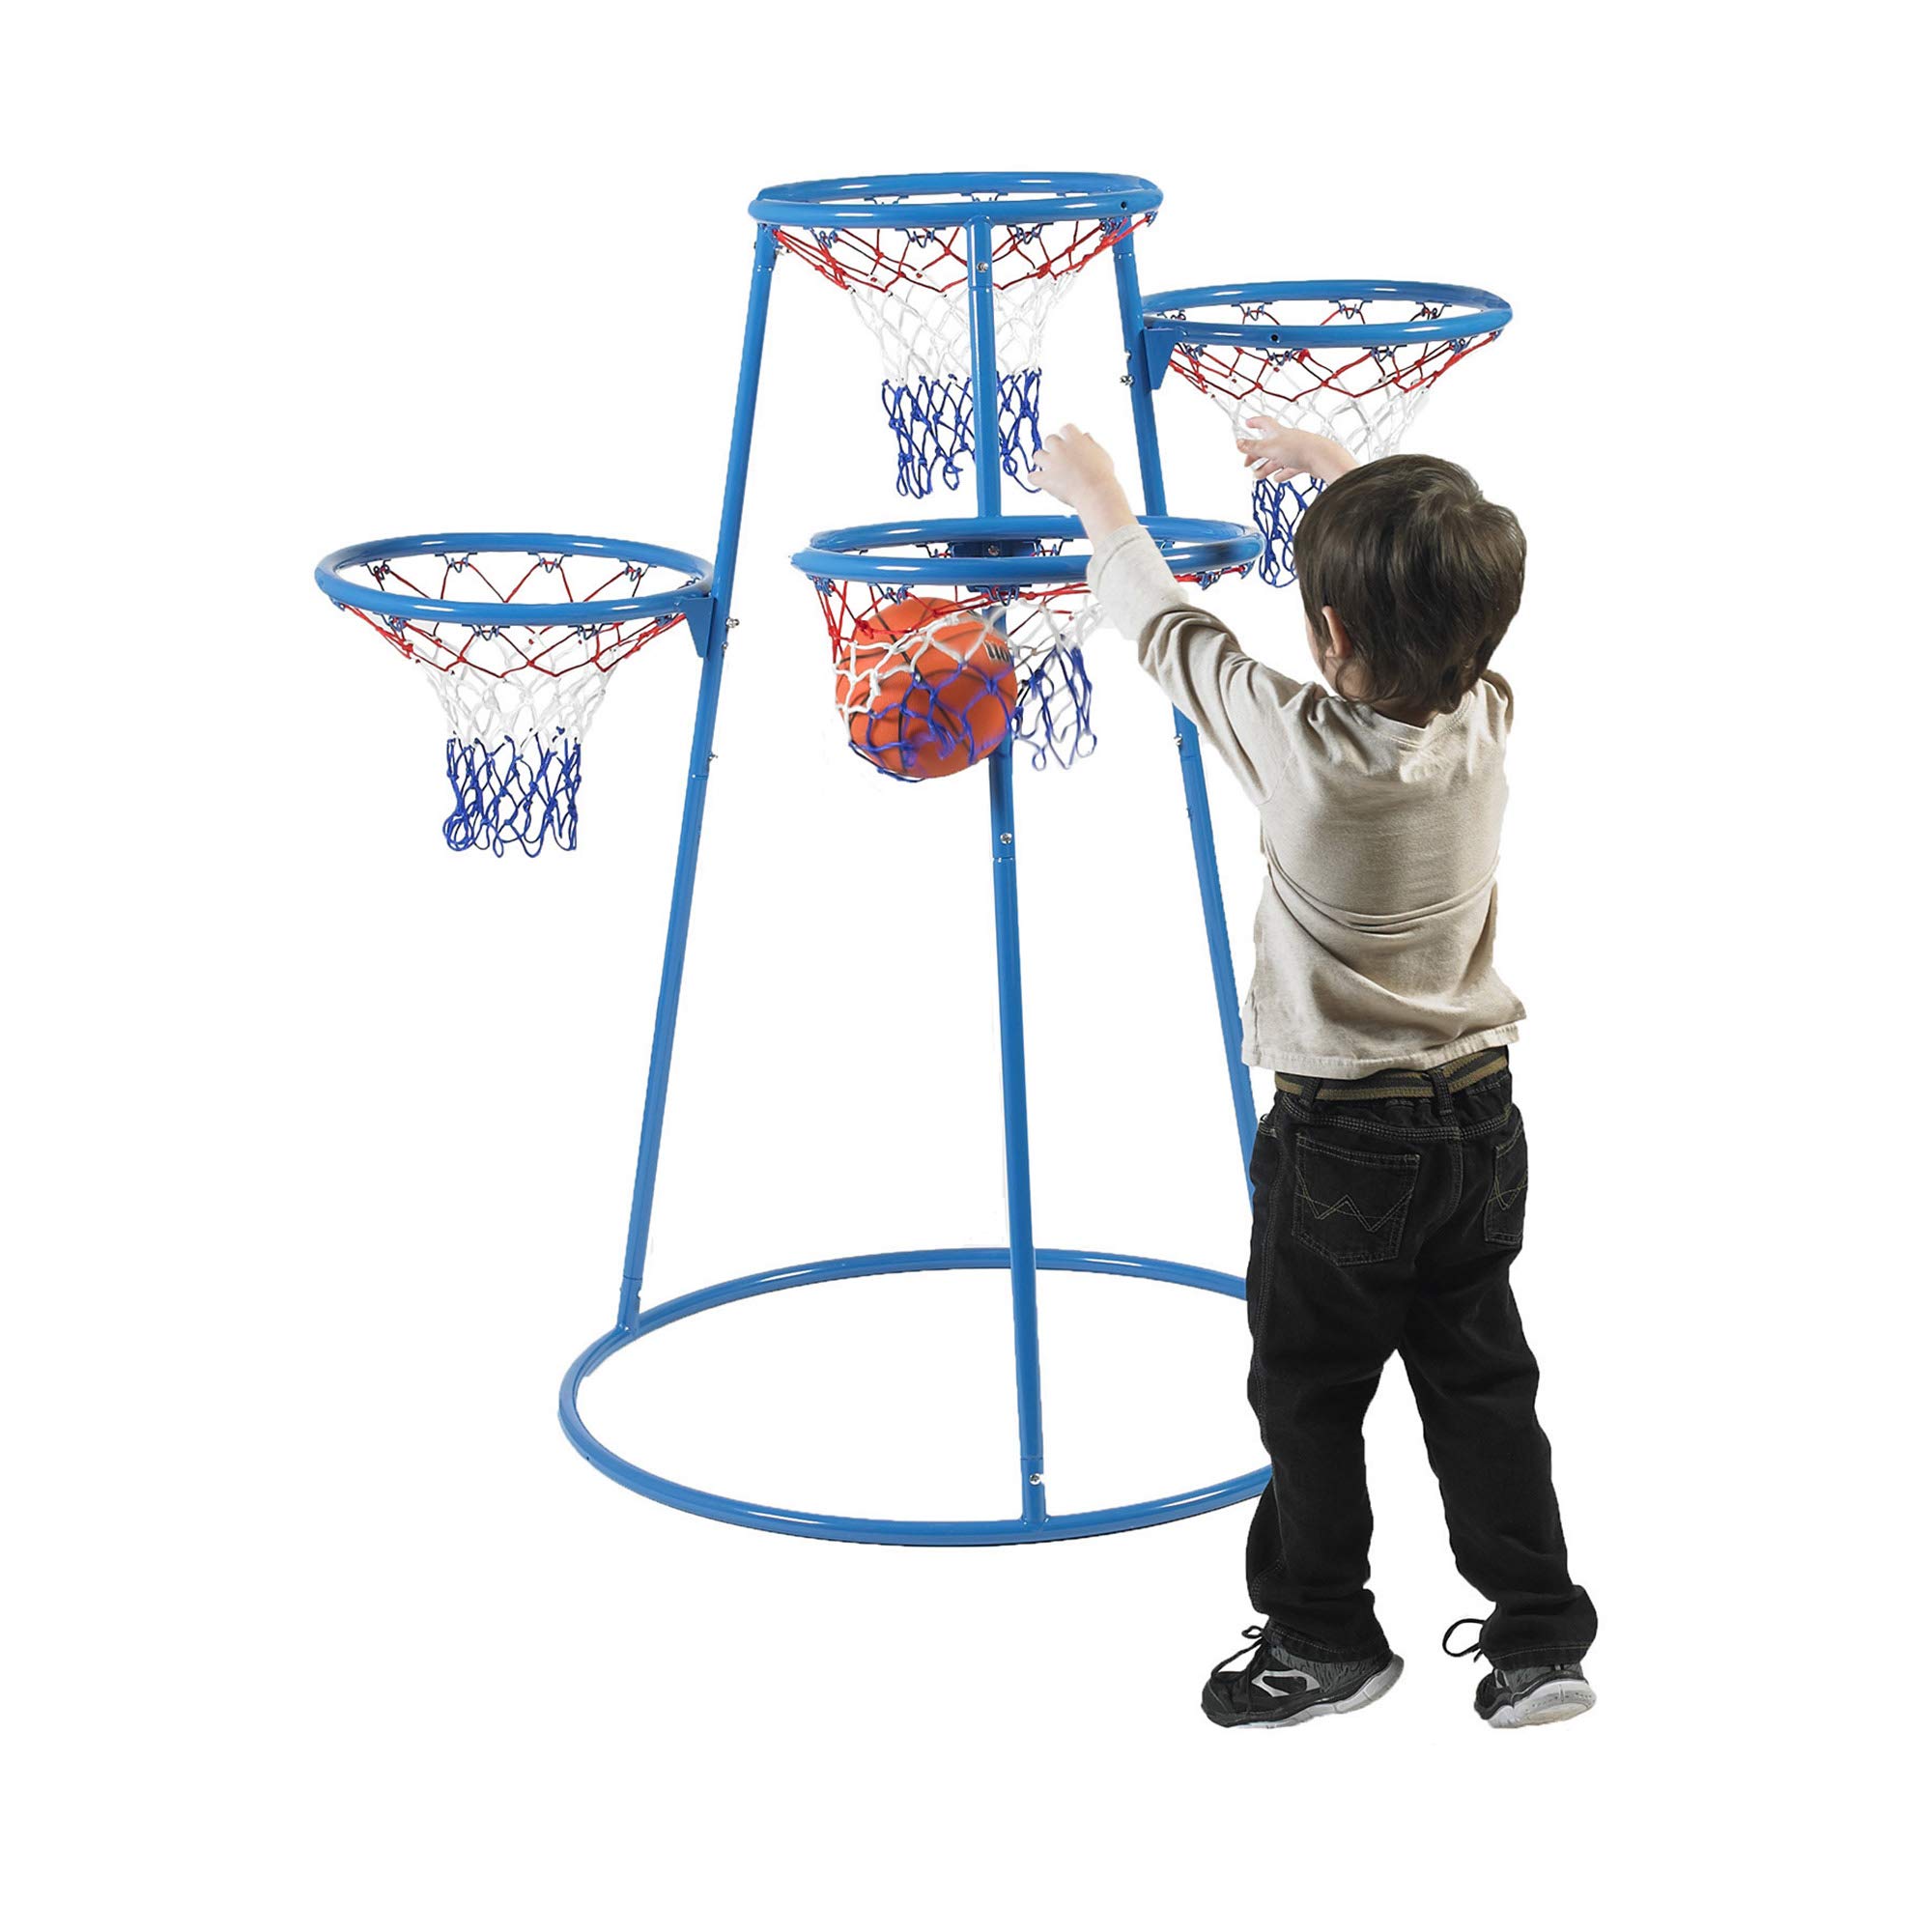 Children’s Factory, AFB7950, Angeles 4-Rings Basketball Hoops with Storage Bag, Blue, Toddler and Kids Indoor – Outdoor Preschool & Daycare Mini Hoops